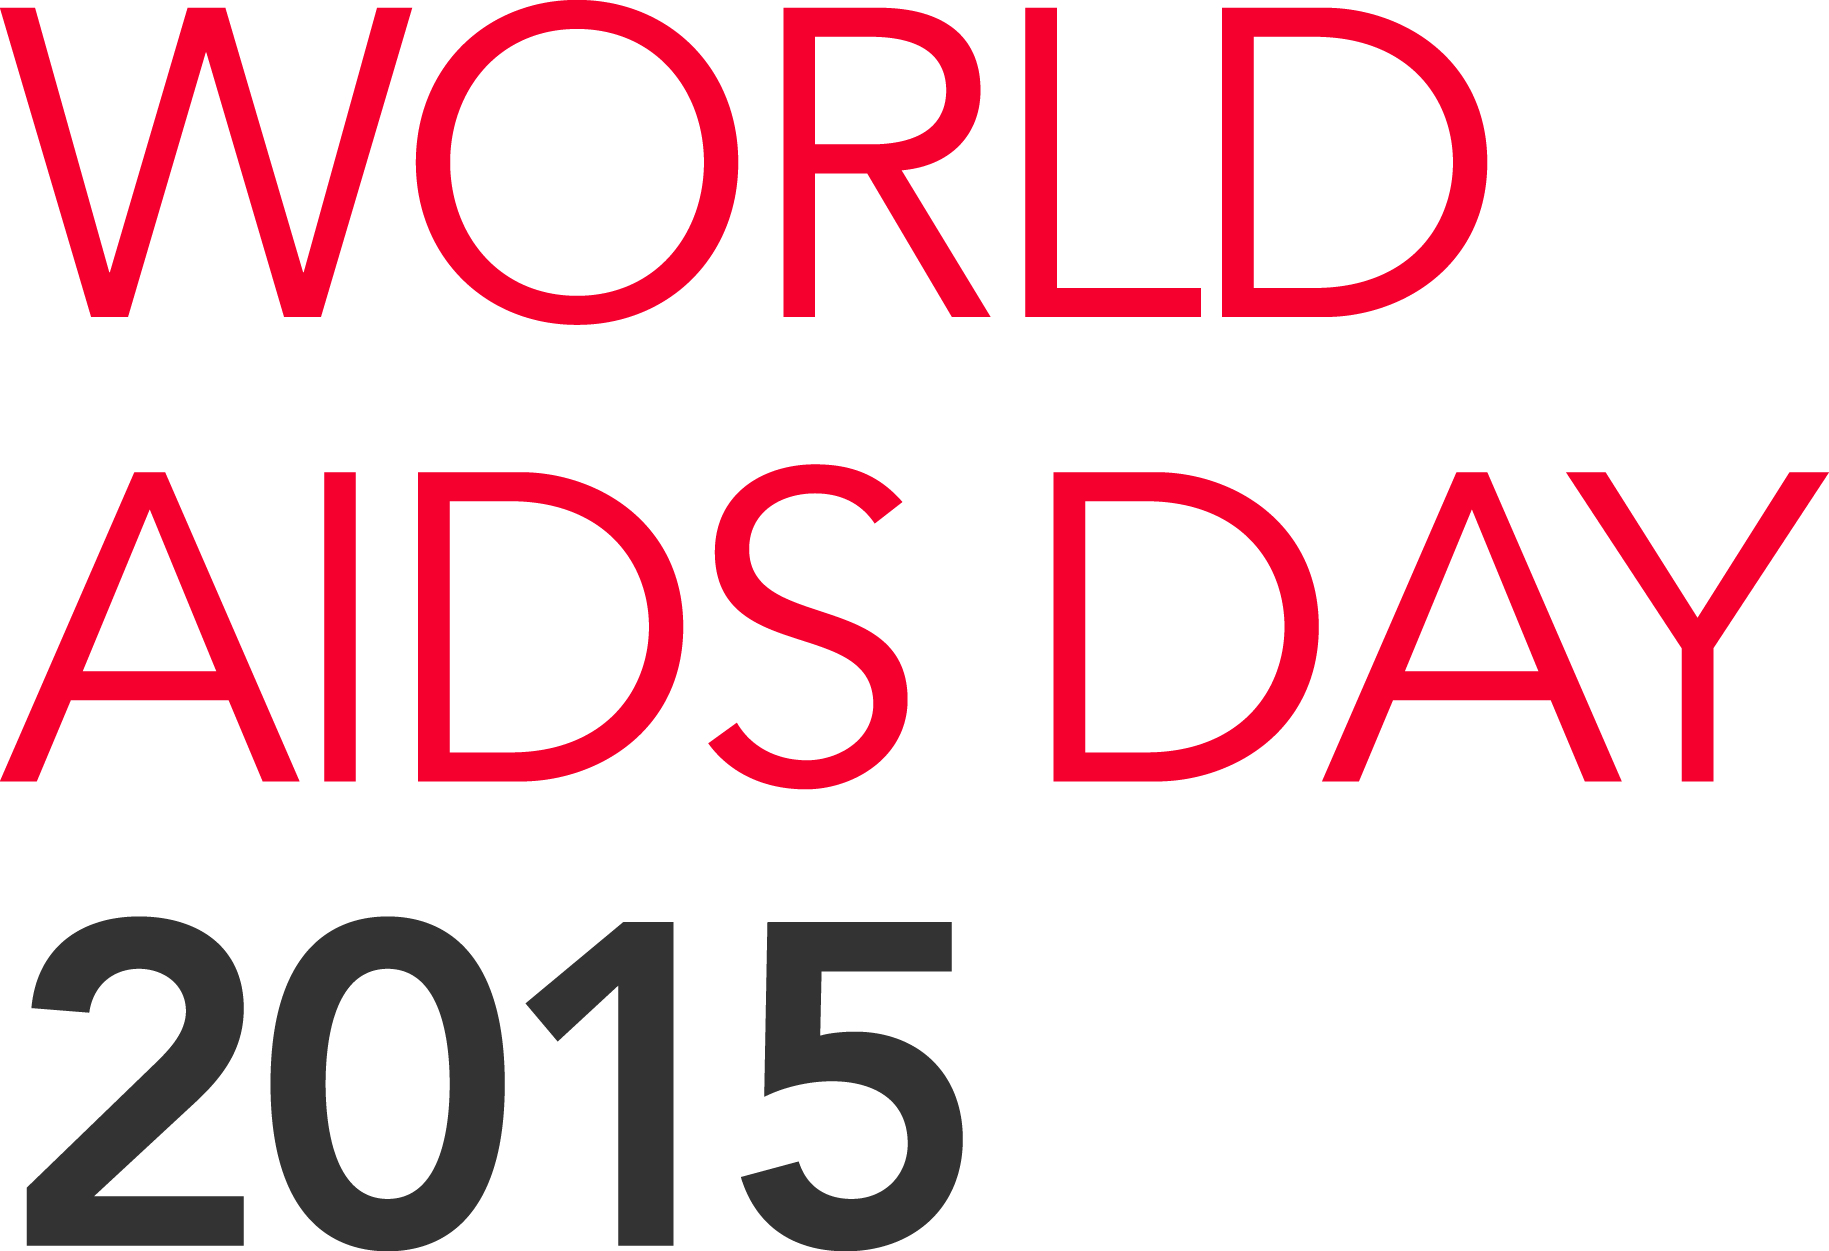 ECOM Position Statement for World AIDS Day 2015